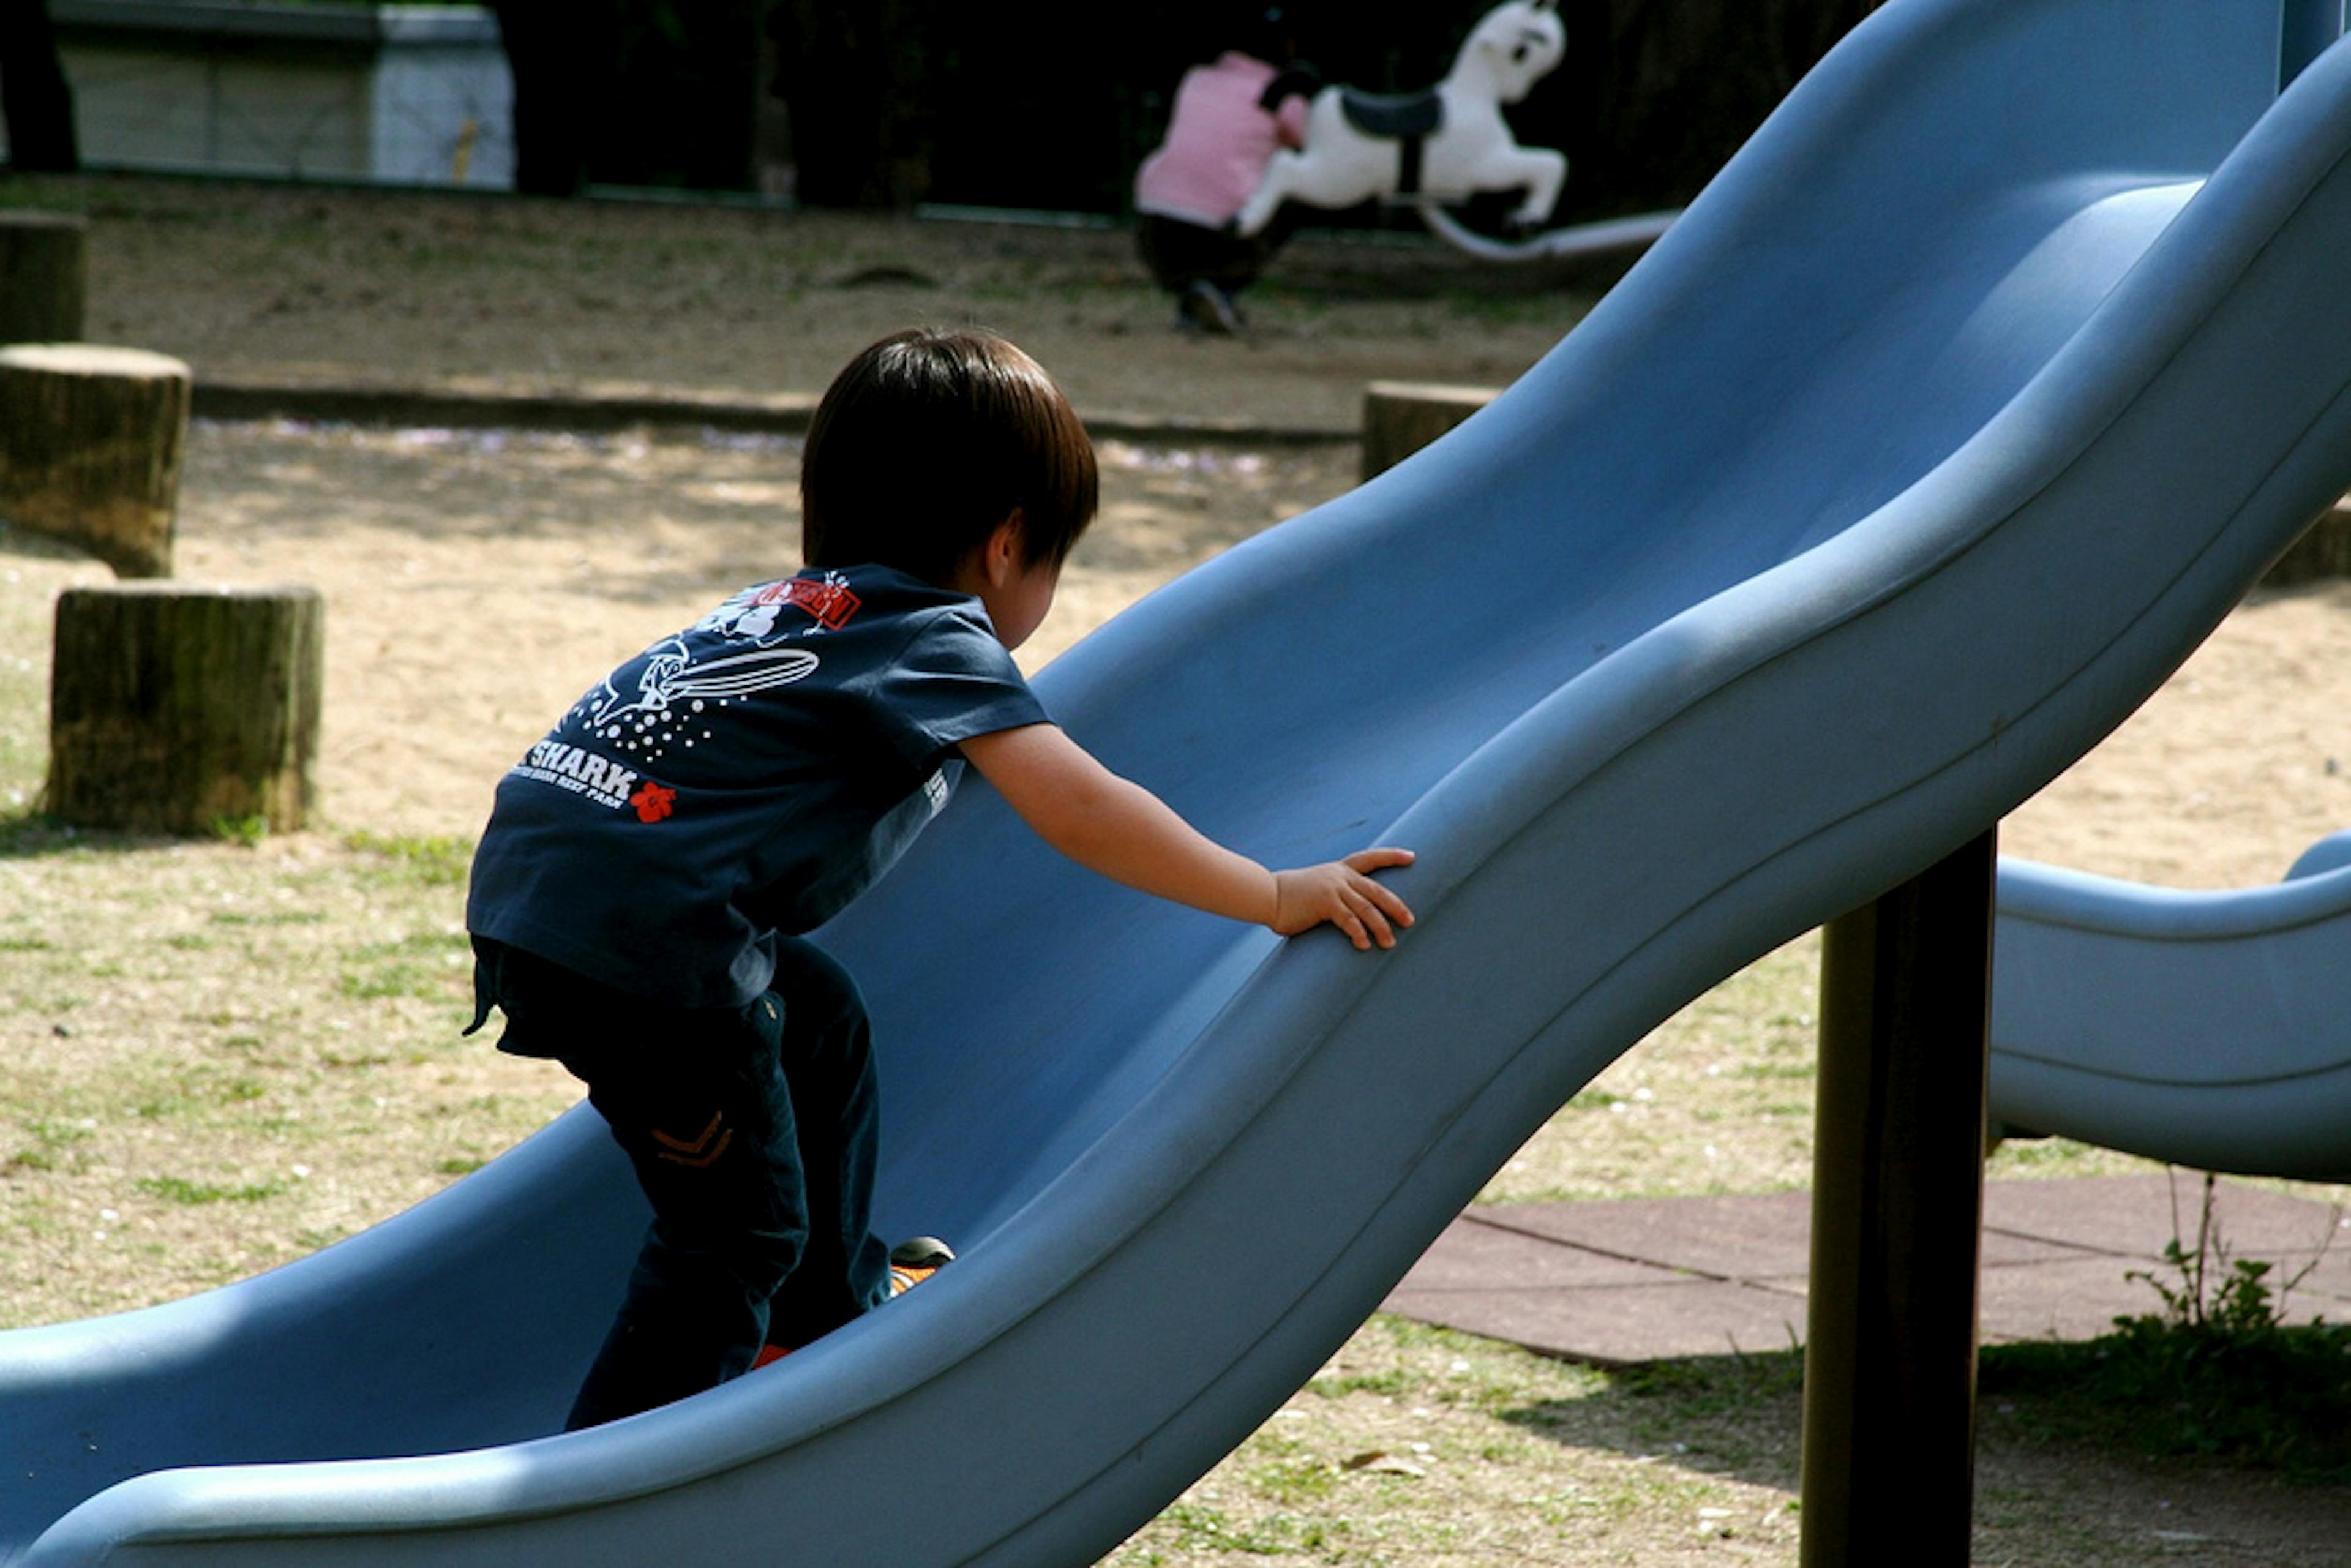 kid playing on a slide at the park